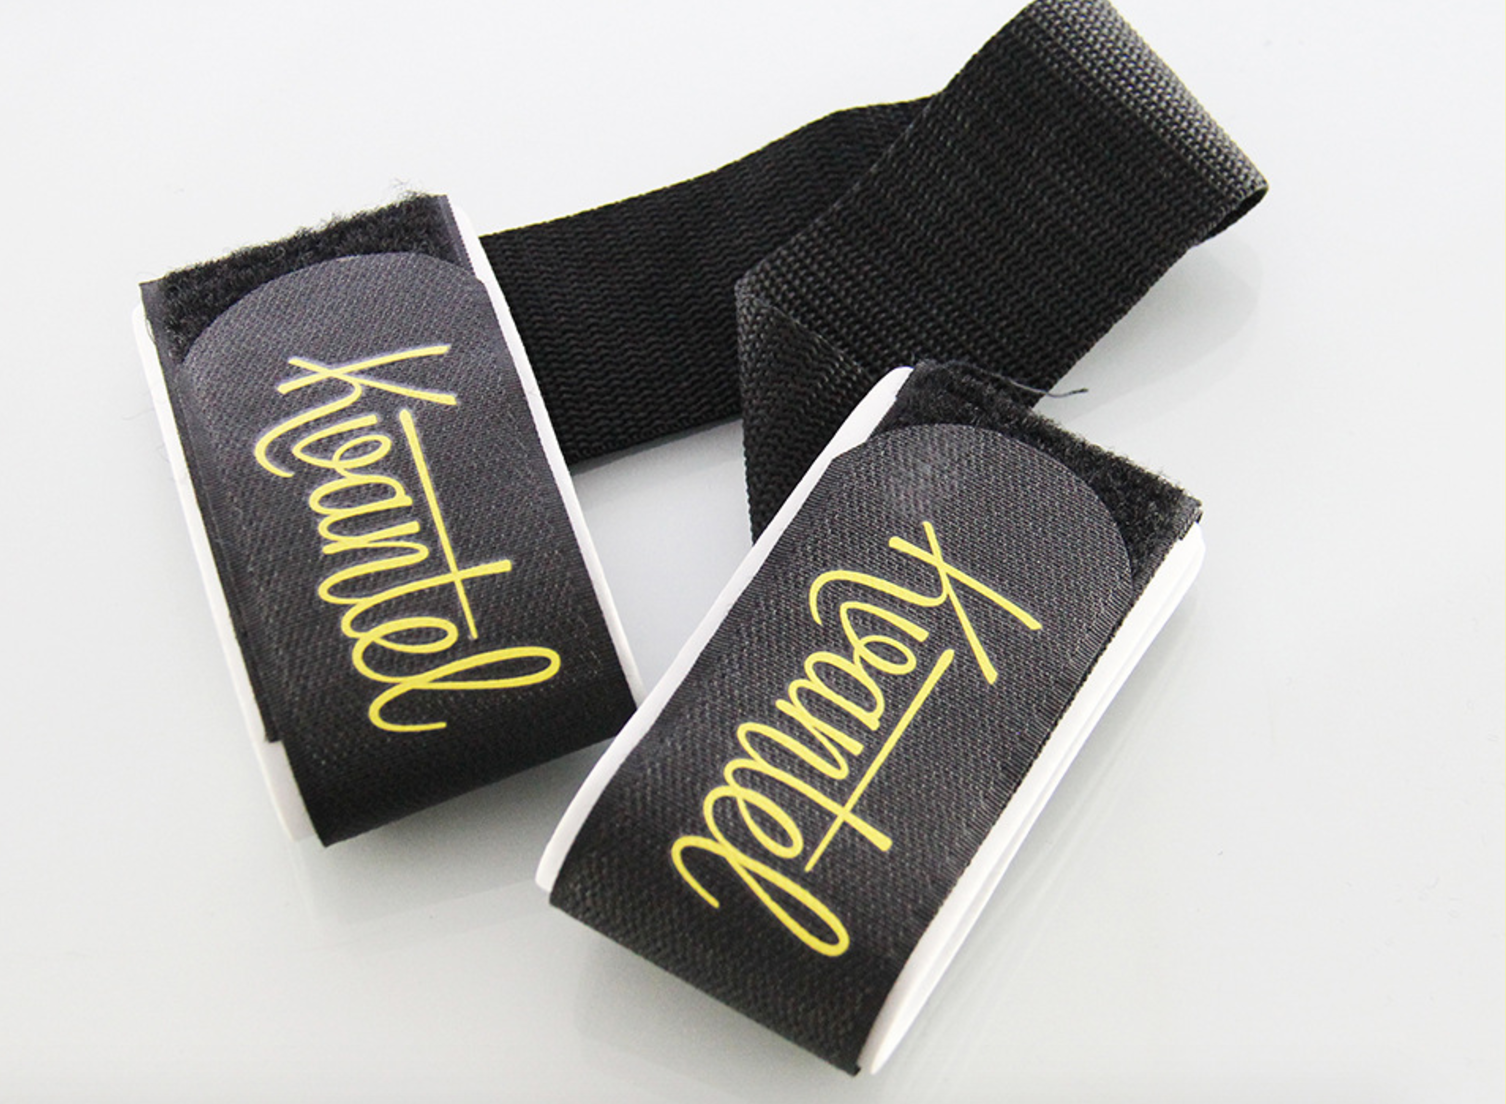 New designed Thick and Strong Two Velcro Ski Strap with Adjustable Webbing